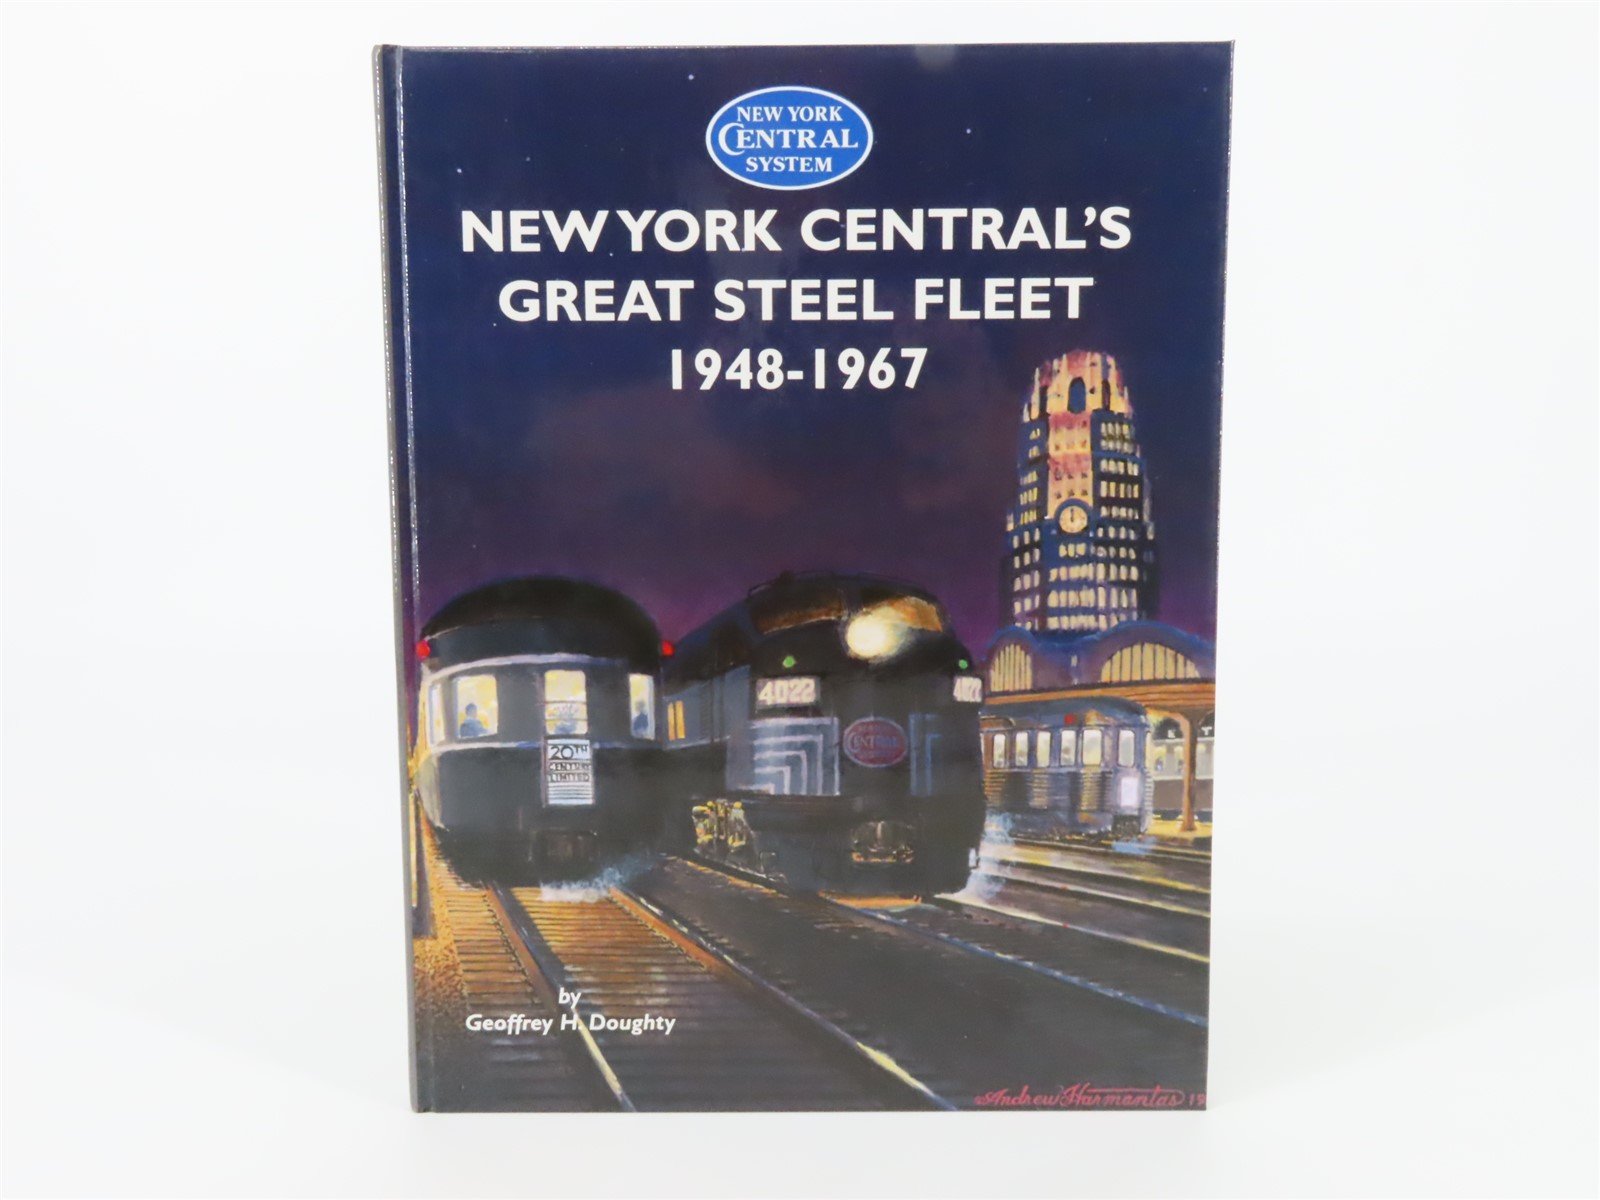 New York Central's Great Steel Fleet 1948-1967 by G.H. Doughty ©1995 HC Book